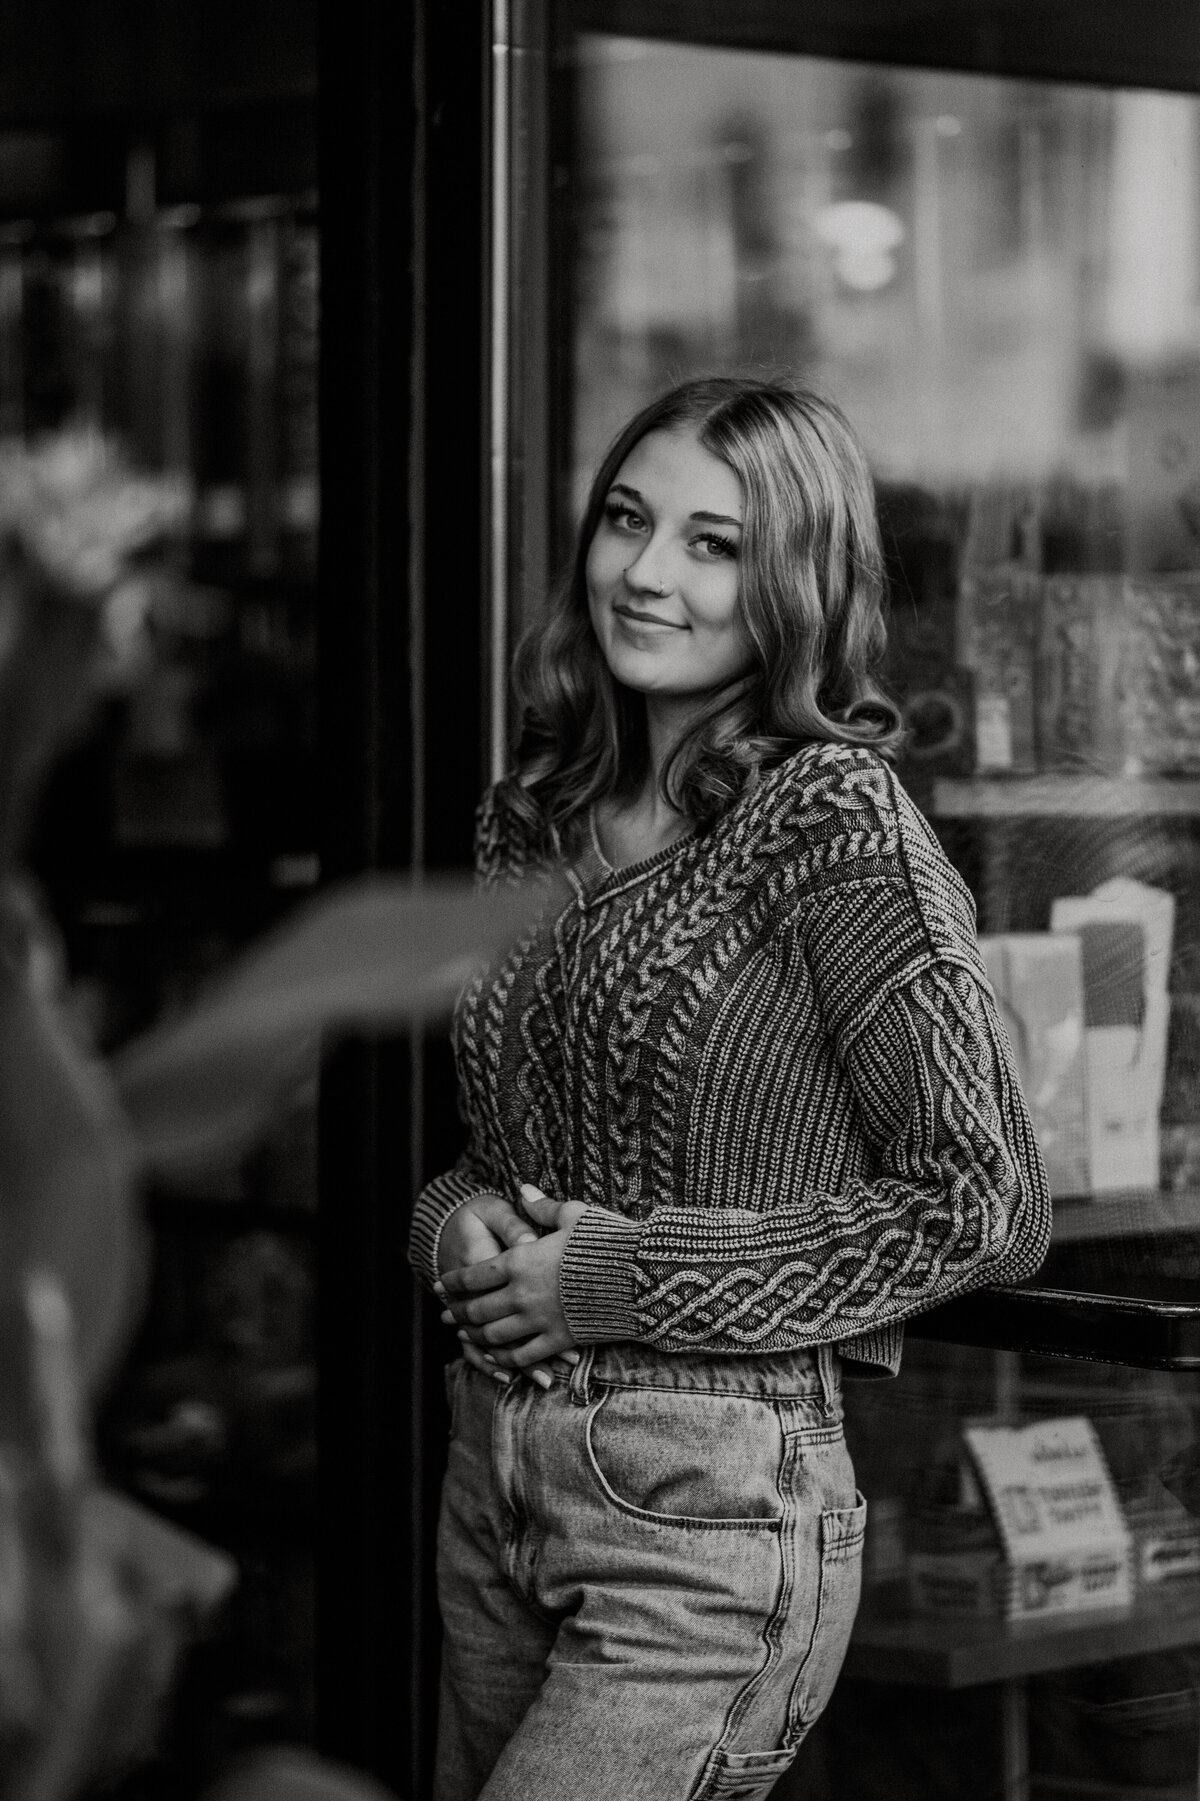 Discover shopfront serenity in your high school senior portraits with Shannon Kathleen Photography in the heart of Stillwater. Combine style with charm. Book your session today.